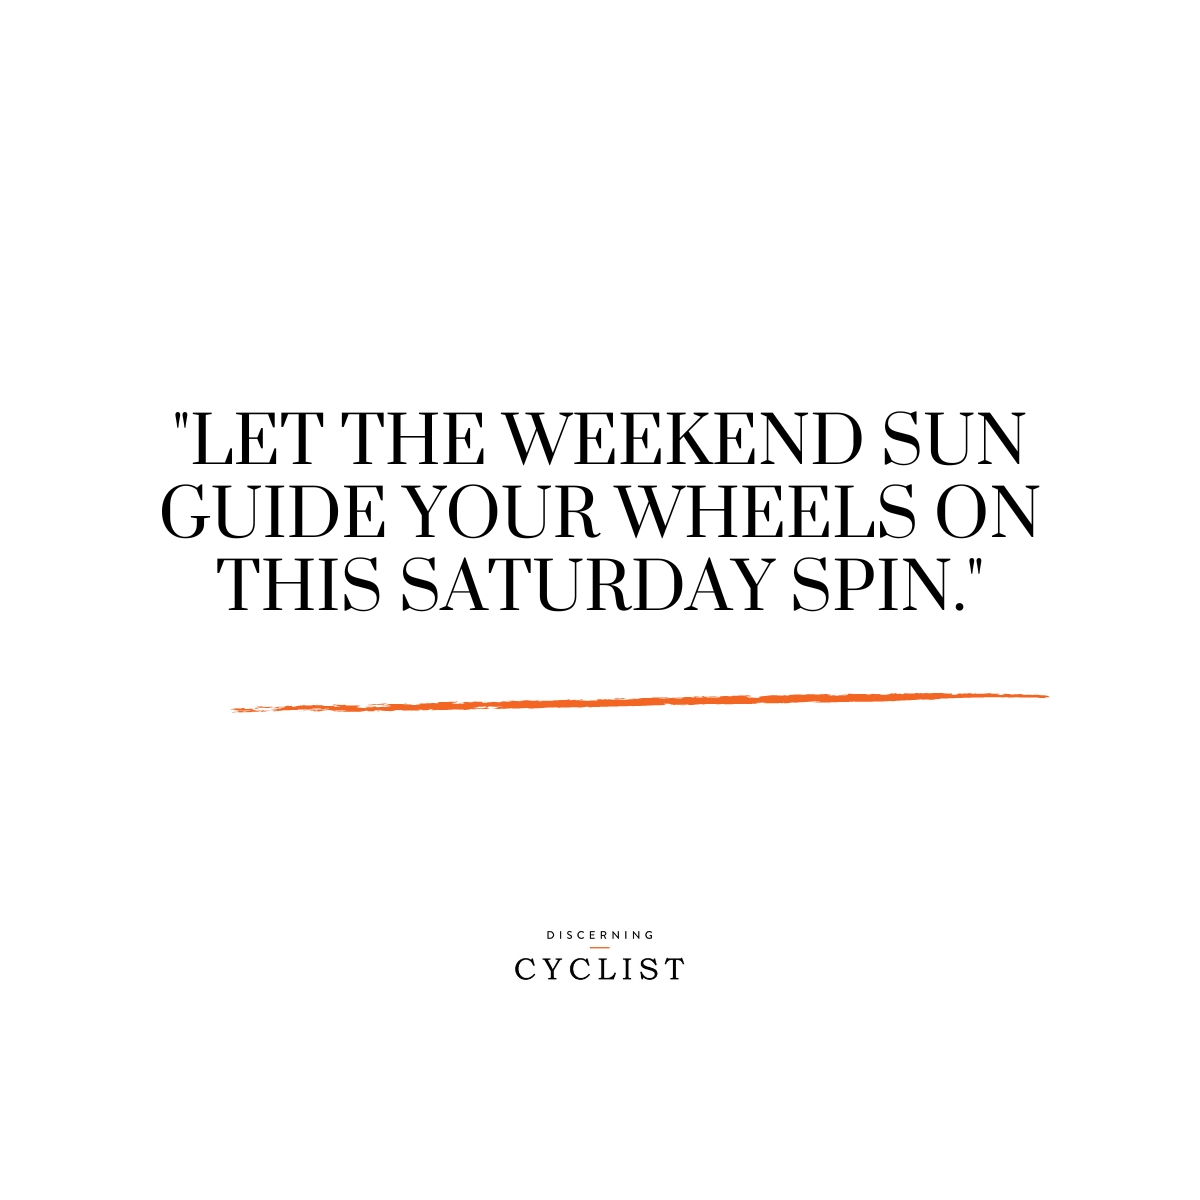 "Let the weekend sun guide your wheels on this Saturday spin."